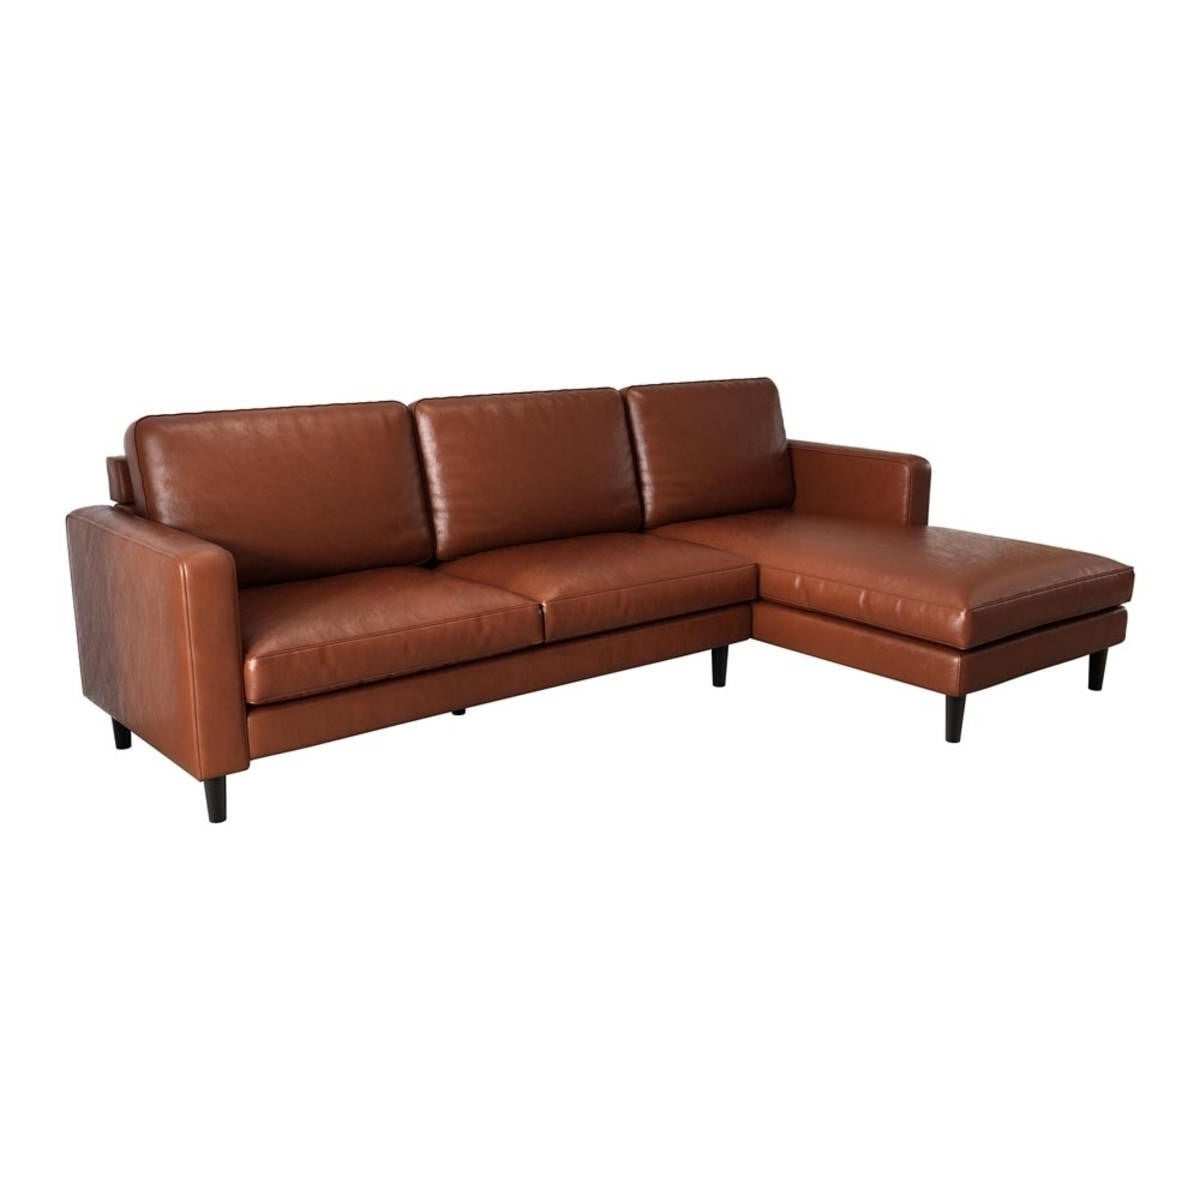 Light Brown Leather Chaise Lounge / You may found another brown leather